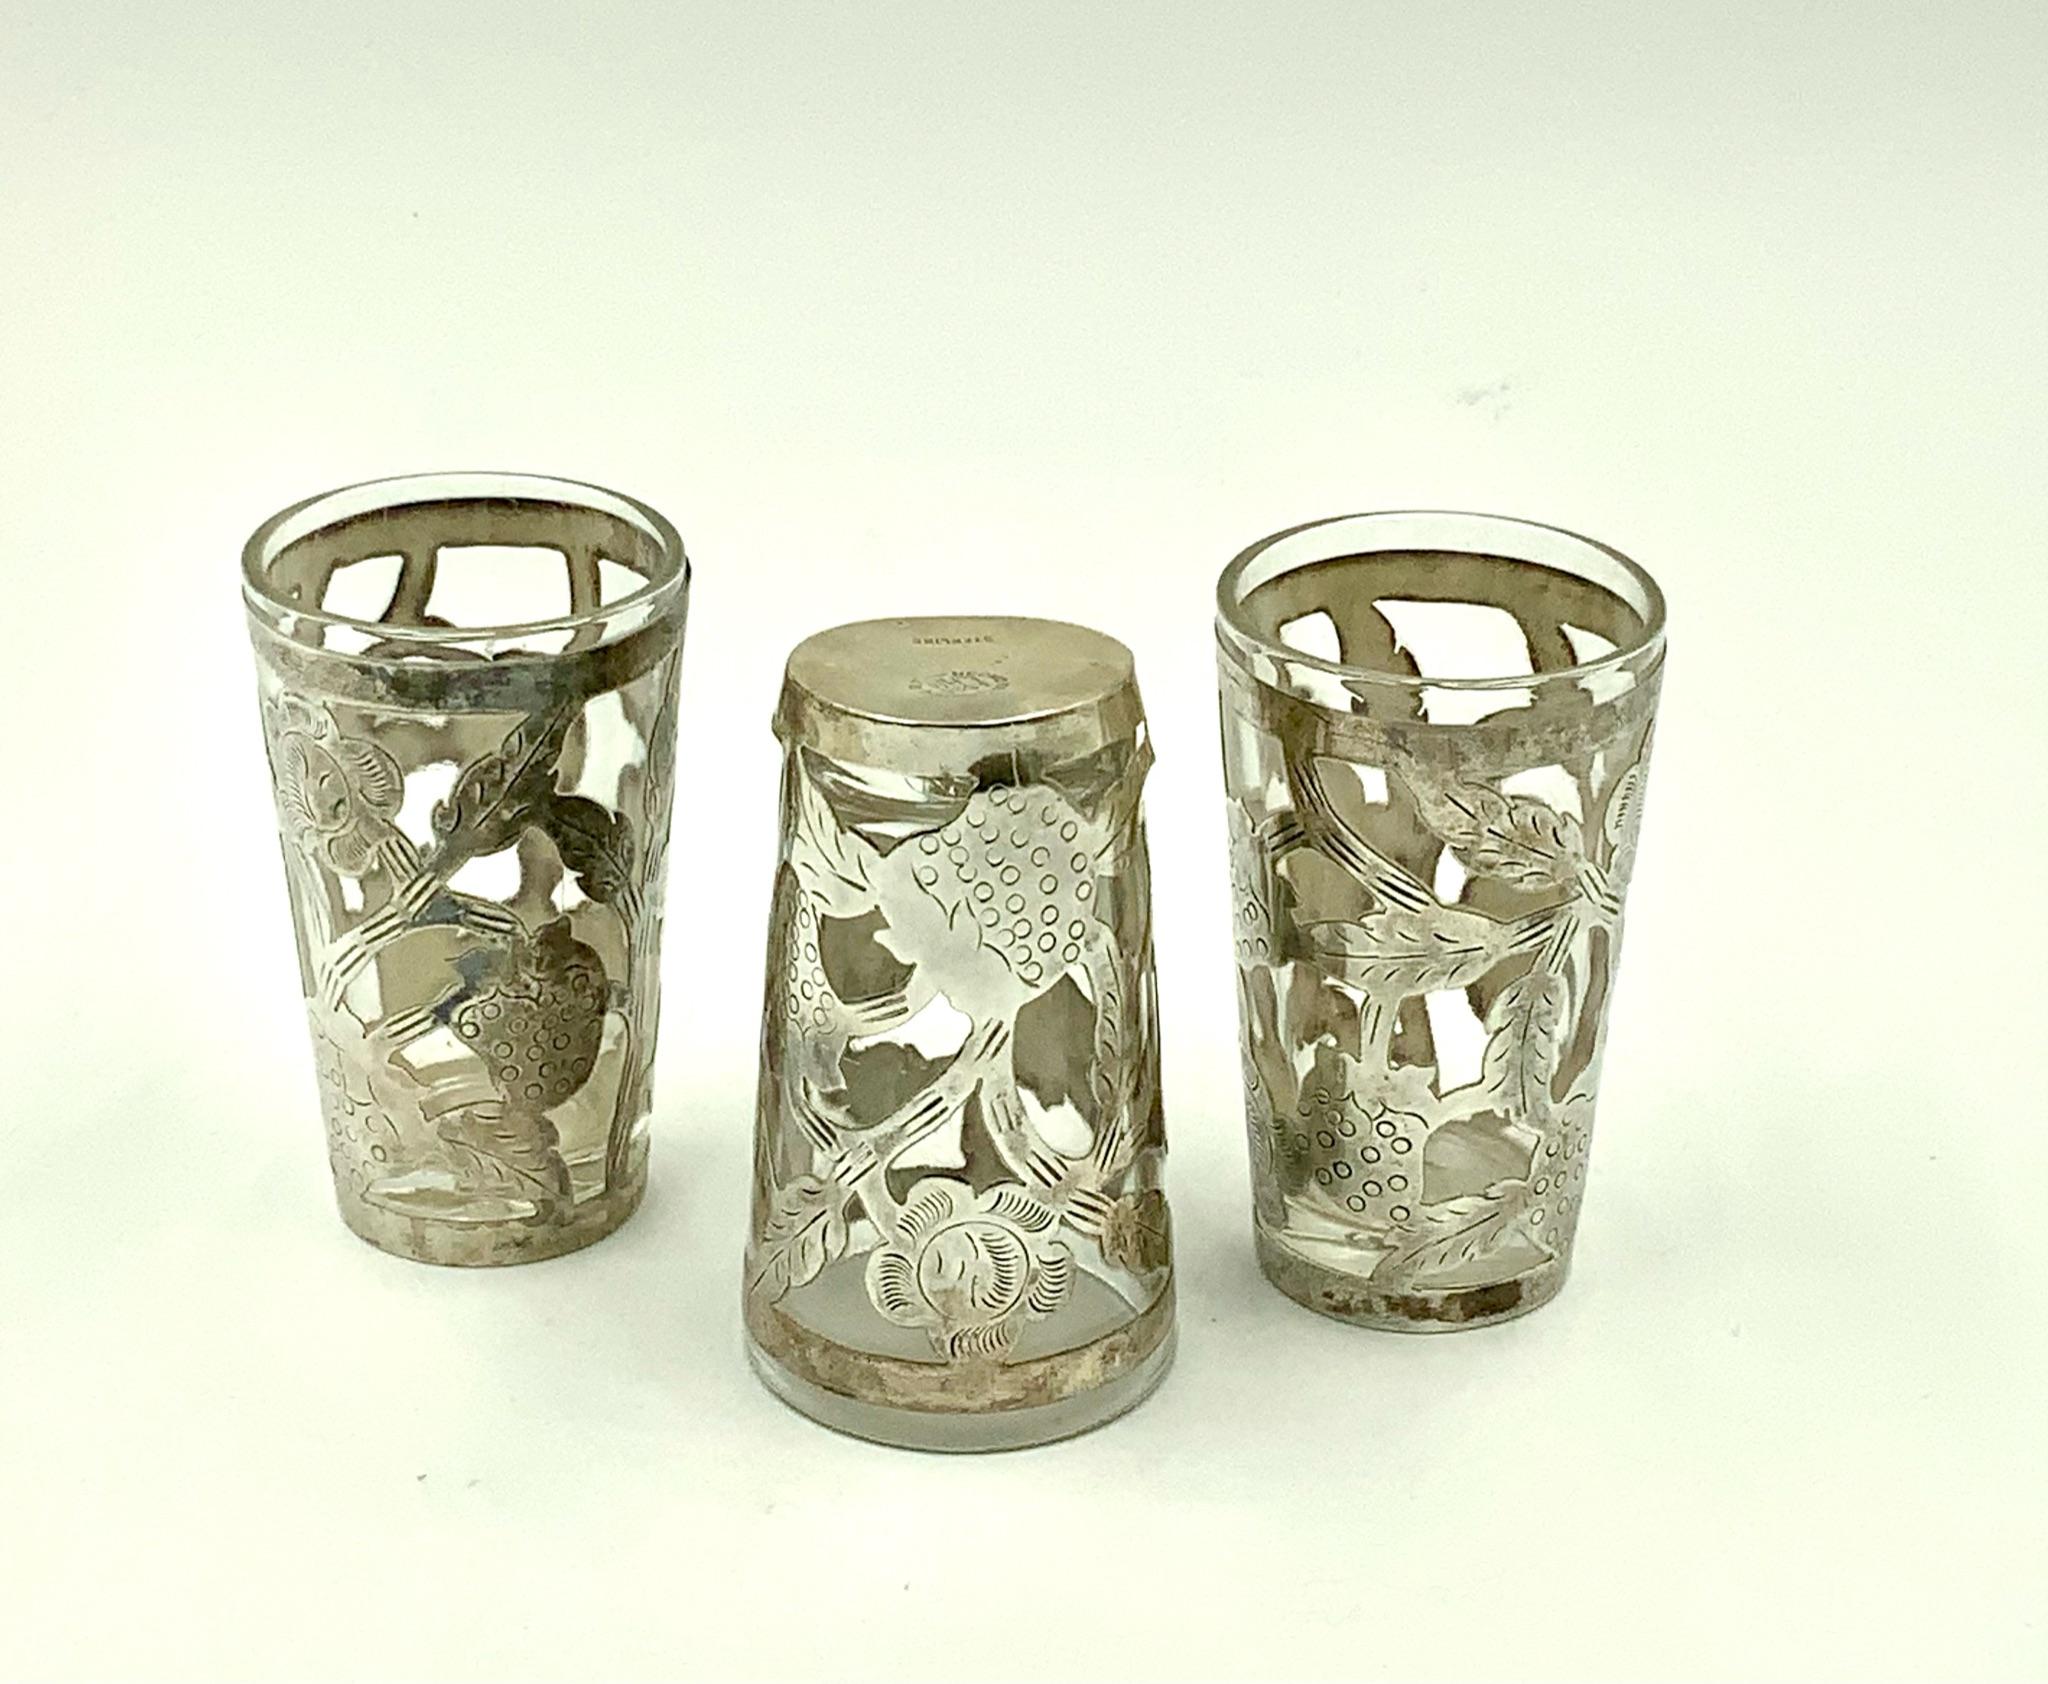 Metalwork Mexican Floral Sterling Silver Overlay Tall Tumbler Lemonade Glasses Set of 6